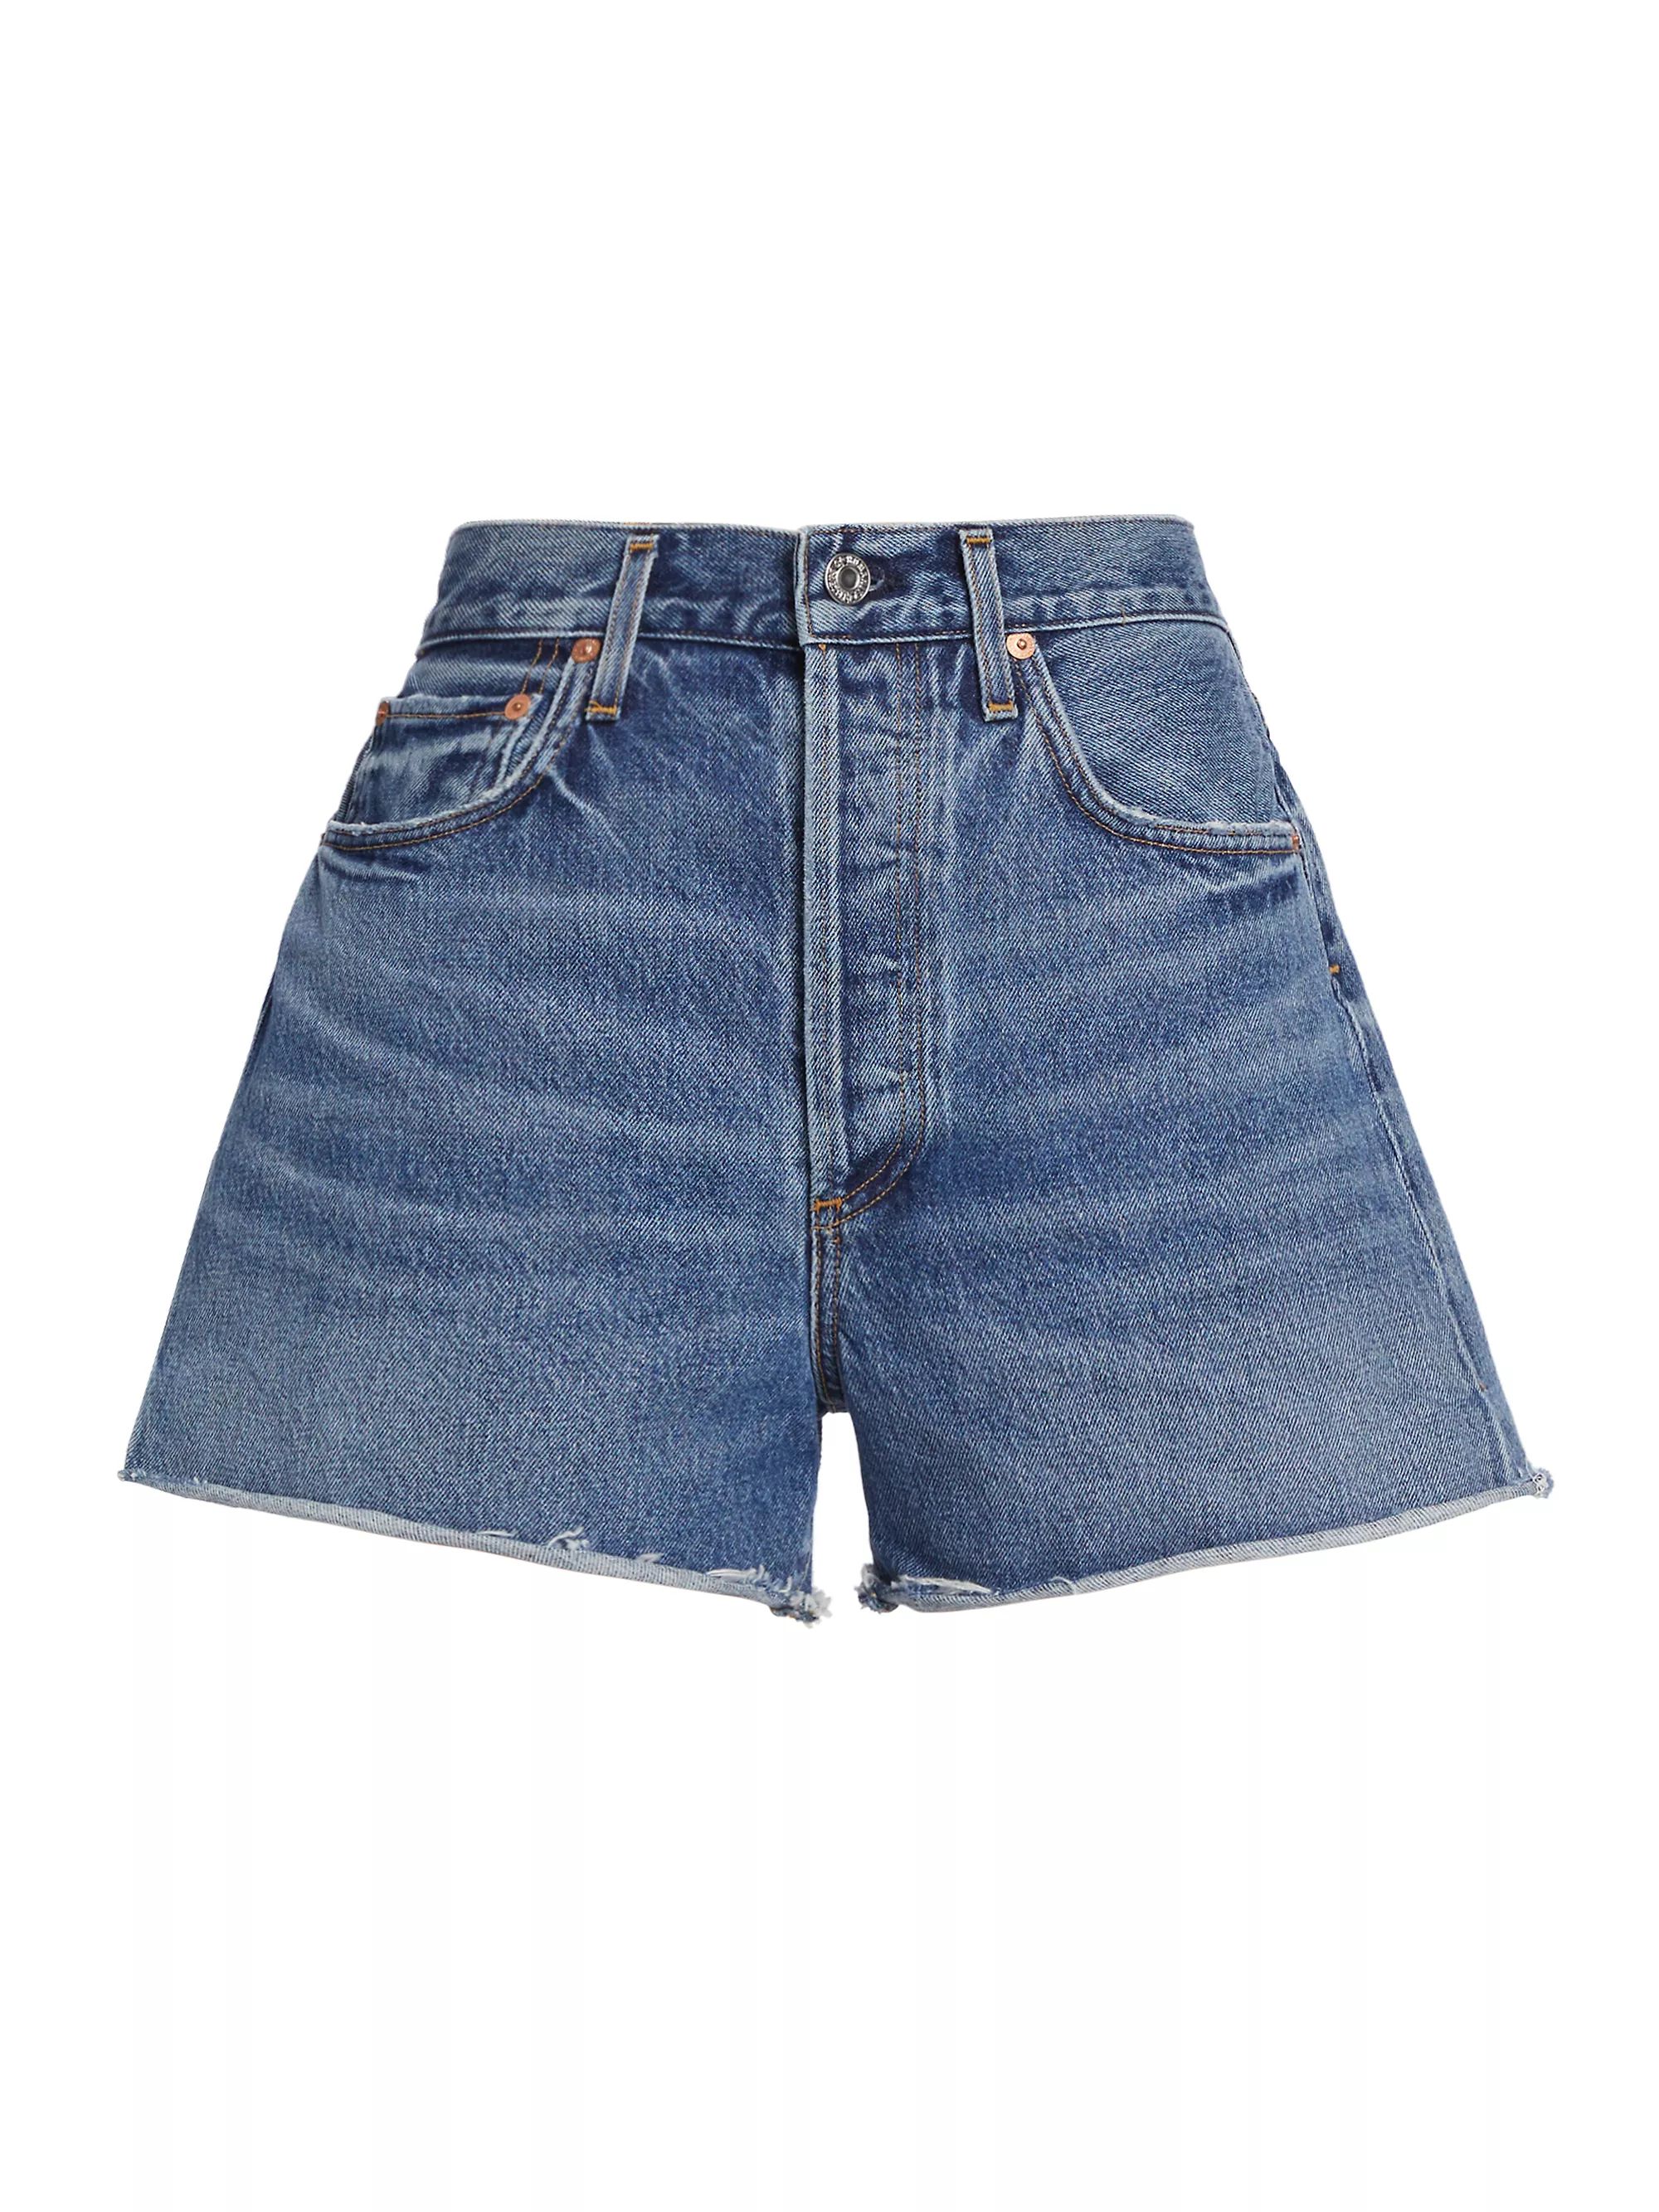 Shop Citizens of Humanity Marlow Mid-Rise Denim Cut-Off Shorts | Saks Fifth Avenue | Saks Fifth Avenue